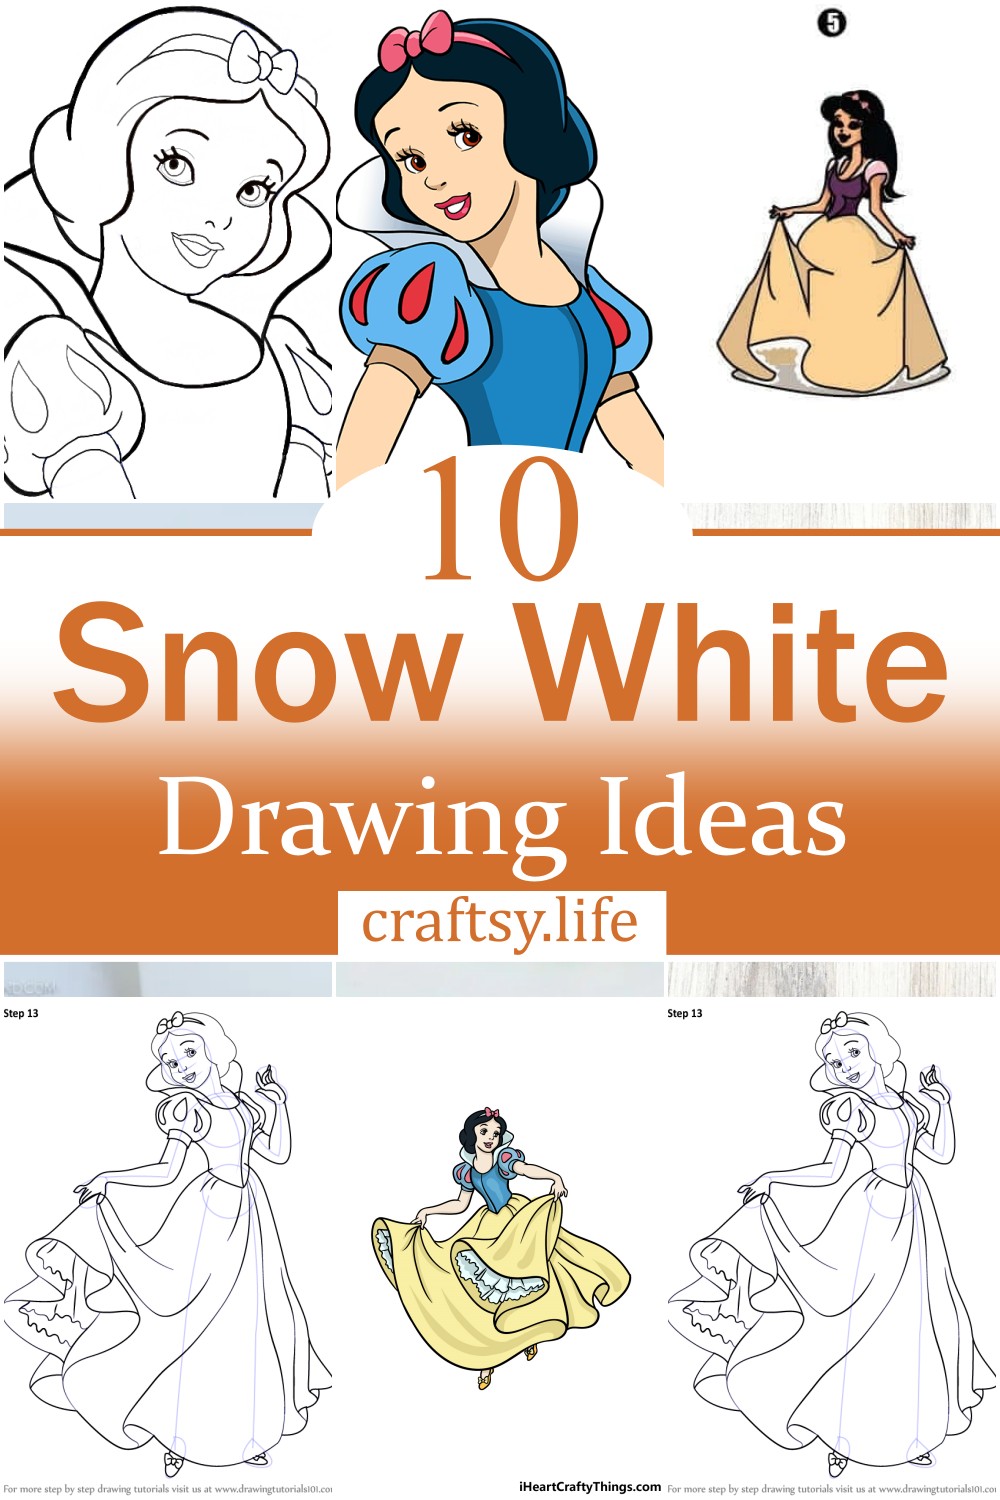 10 Snow White Drawing Ideas